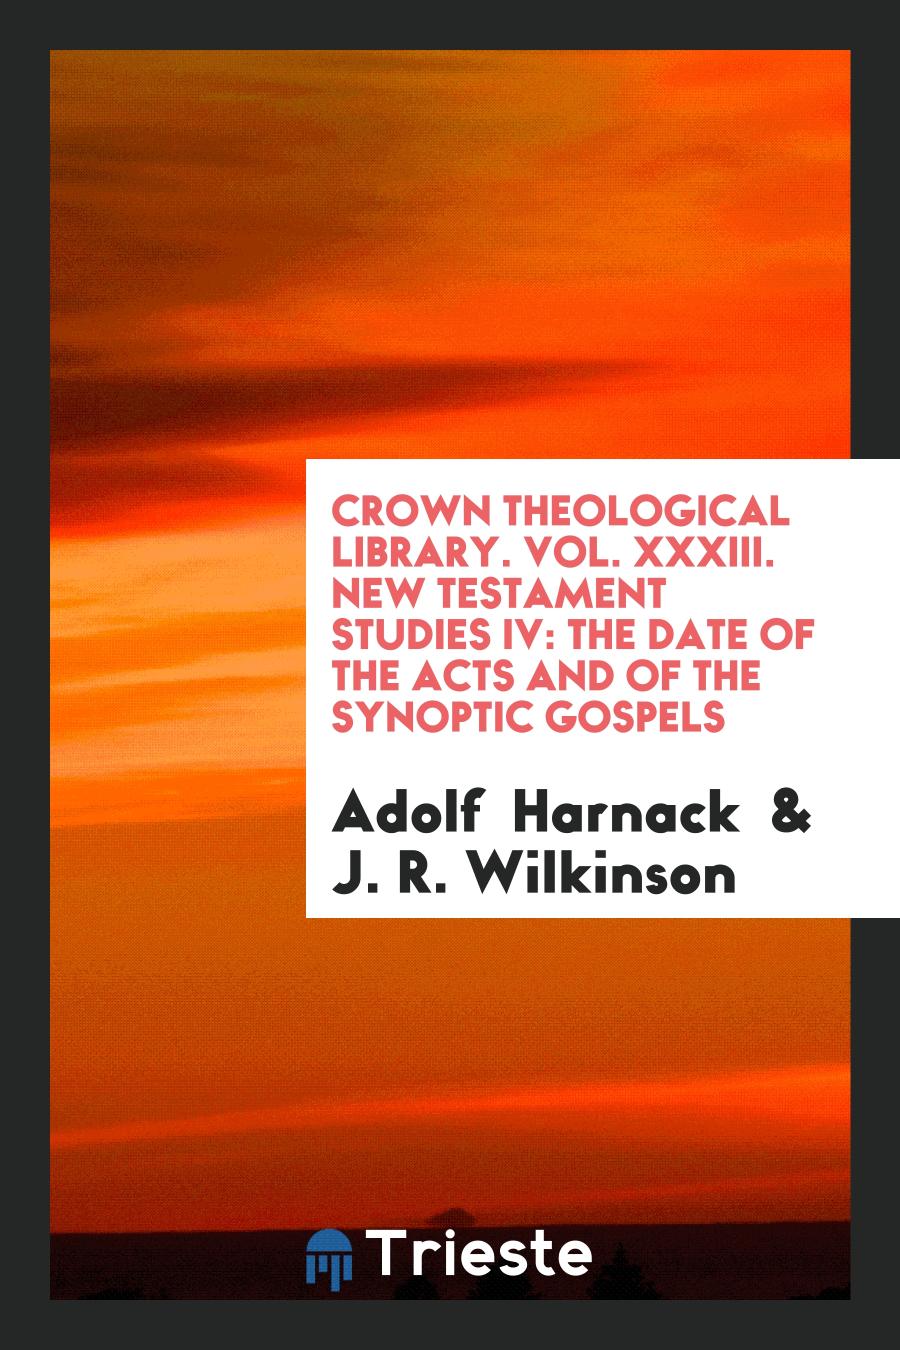 Crown Theological Library. Vol. XXXIII. New Testament Studies IV: The Date of the Acts and of the Synoptic Gospels